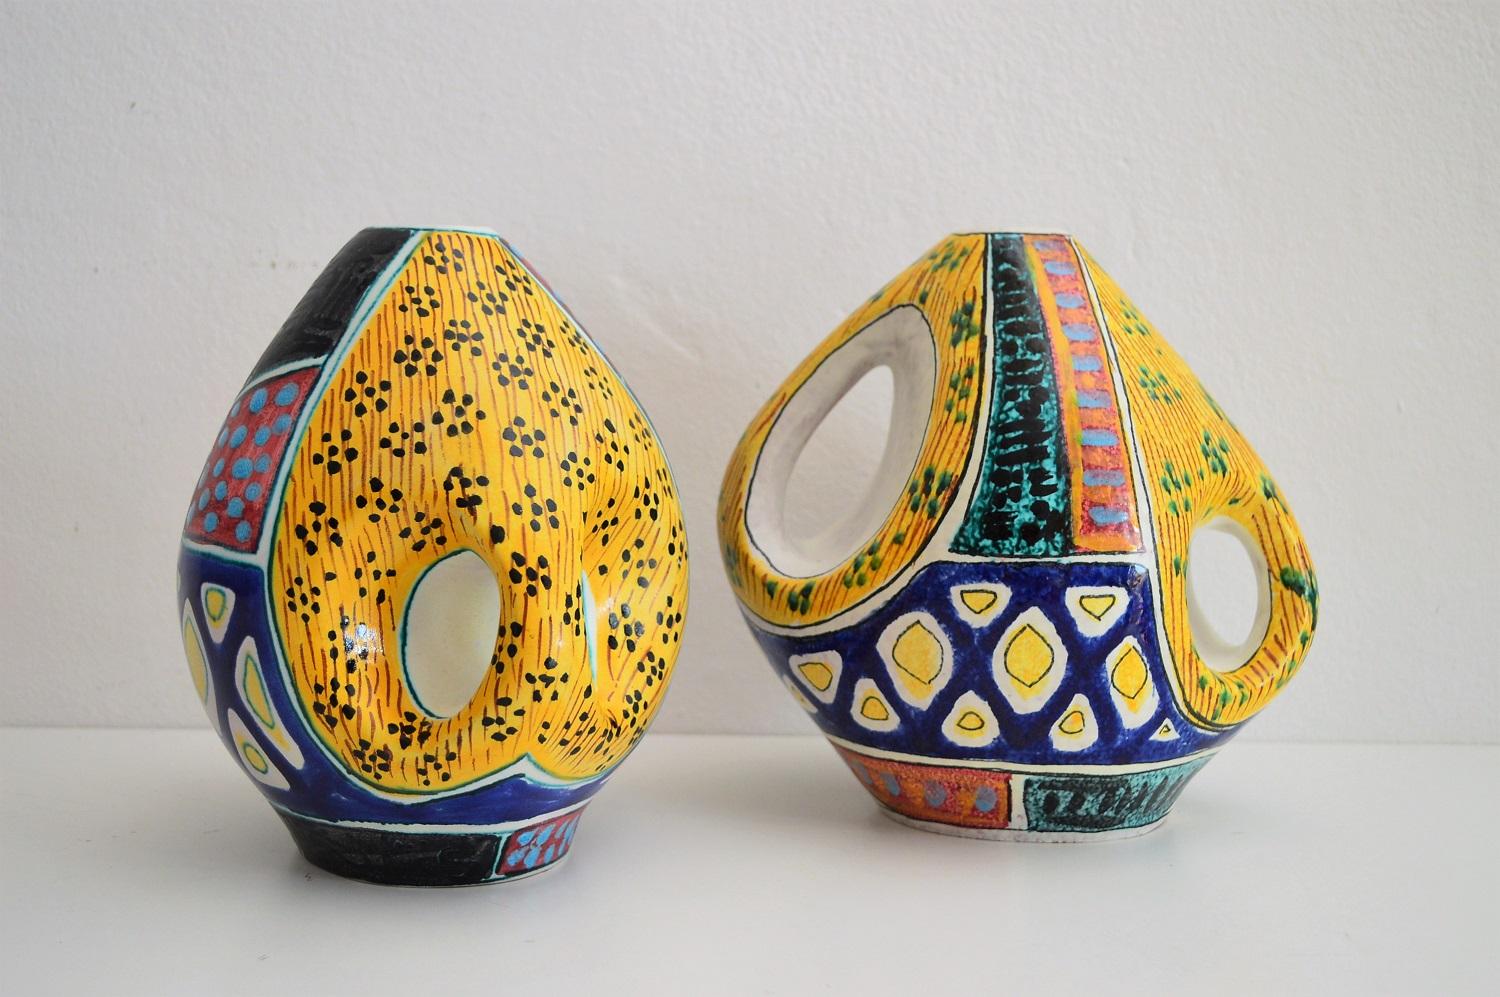 Beautiful set of two colorful pieces ceramic vases or vessels with typical pattern from the midcentury, approximate 1950-1960.
Made in Northern Italy by Valceresio Ceramic near Ceresio lake, a company which do not exist nowadays.
Both vases are